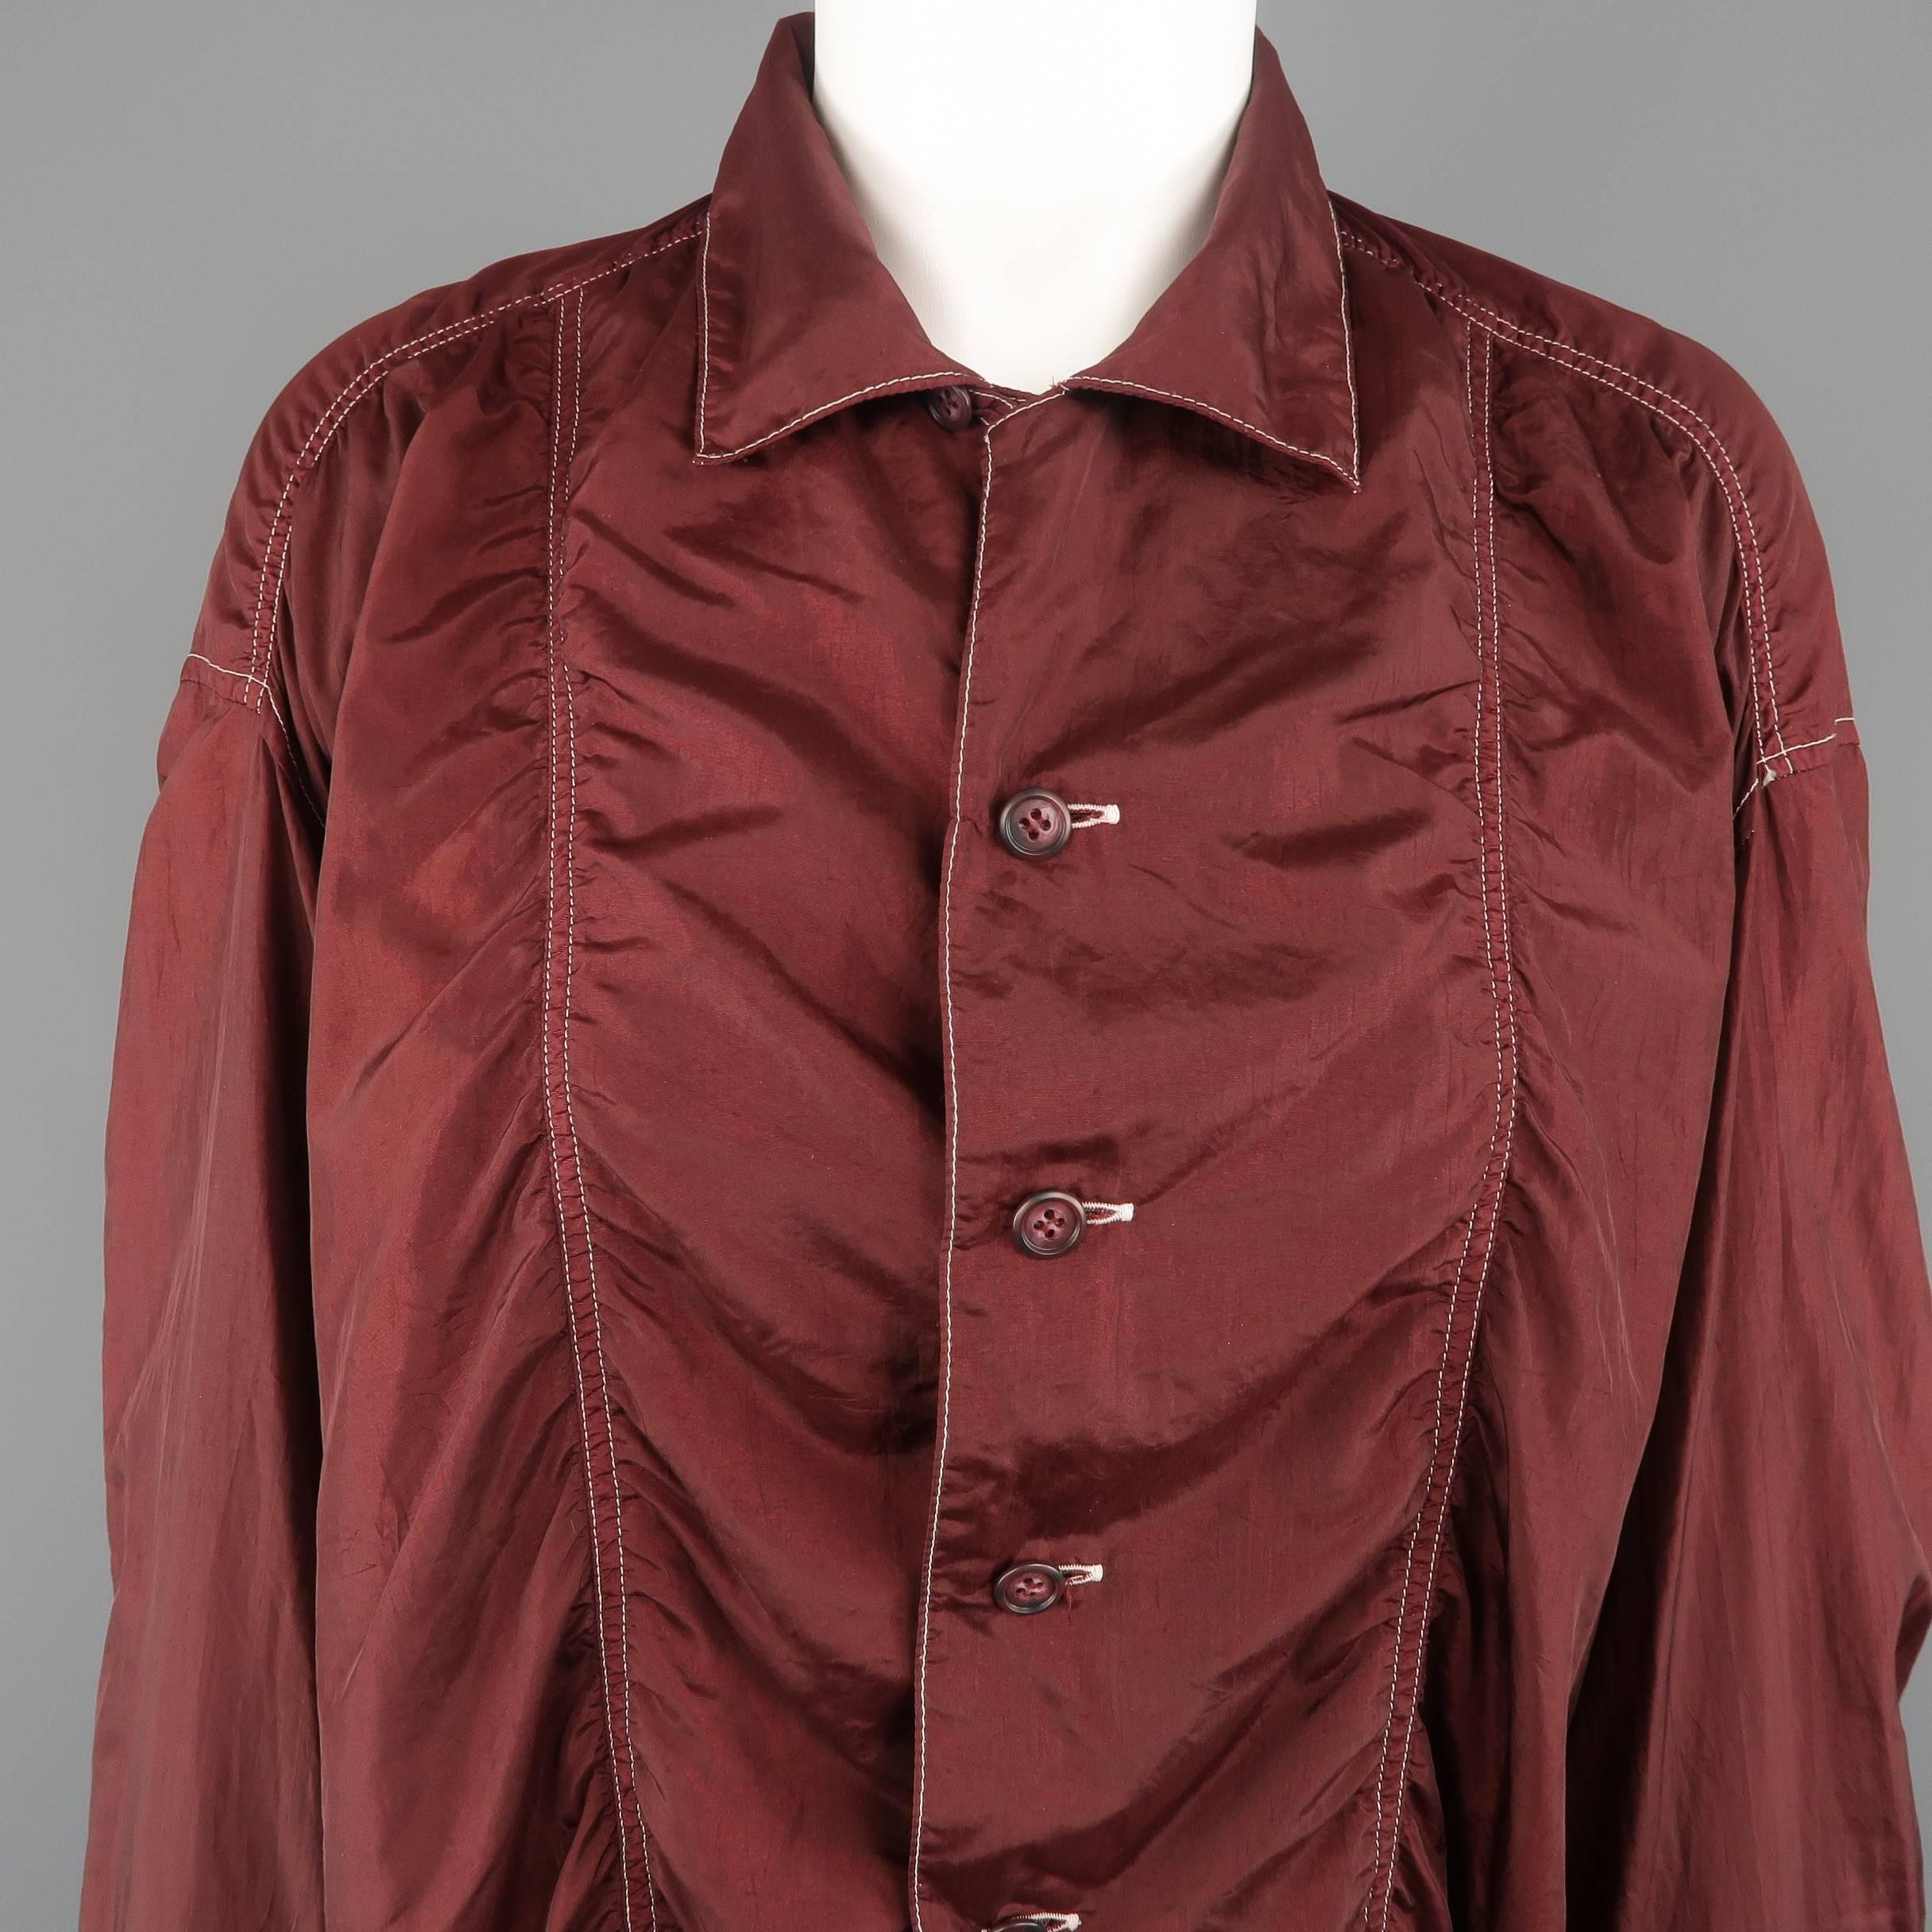 Vintage Issey Miyake oversized shirt comes in burgundy soft taffeta with contrast stitching, pointed collar, and gathered frontal seams. Wear and tags removed. As-is.
 
Good Pre-Owned Condition.
Marked: (no size)
 
Measurements:
 
Shoulder: 20